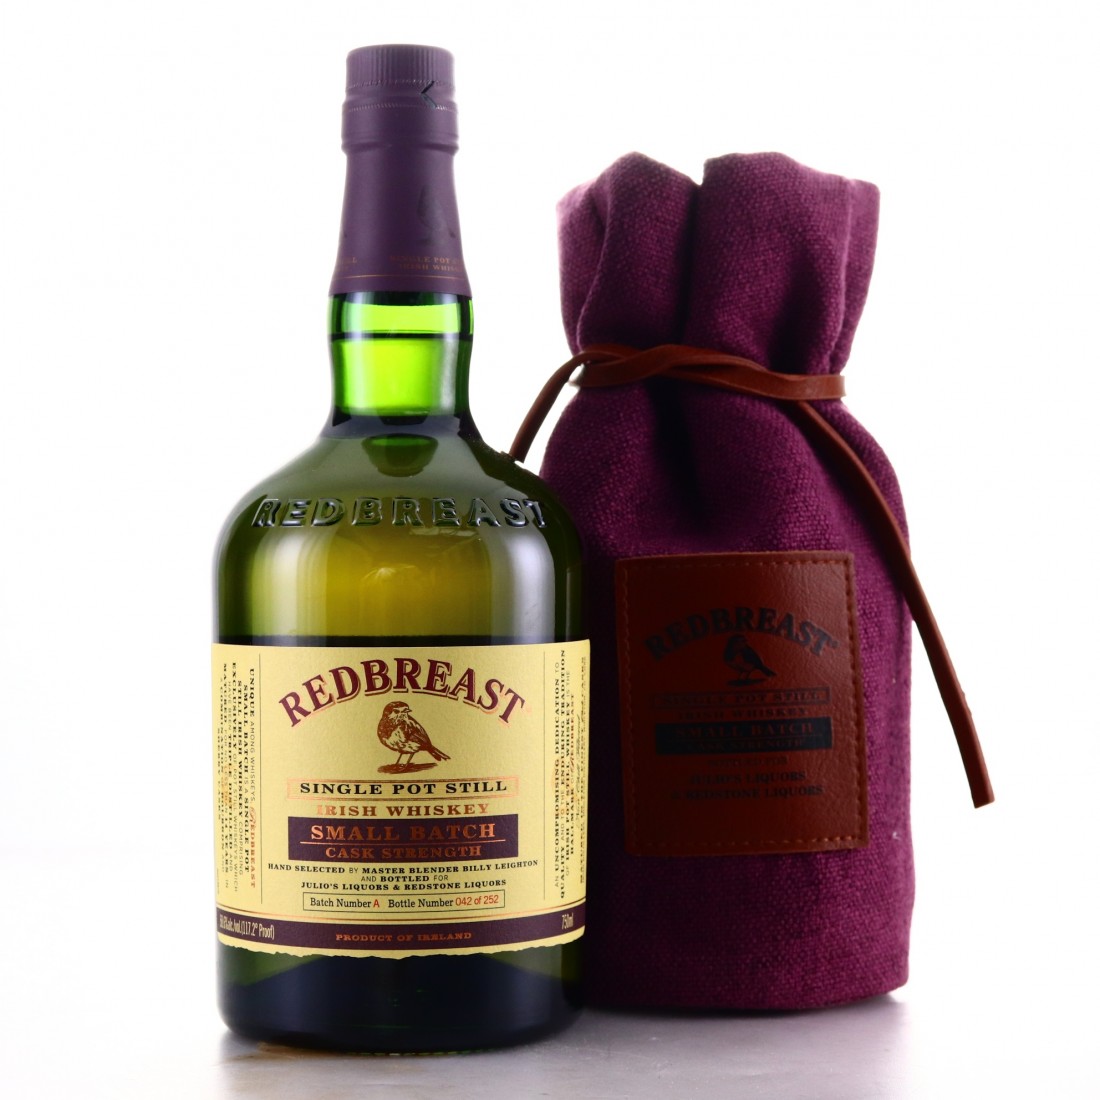 Review #130 – Redbreast Small Batch Cask Strength “C”